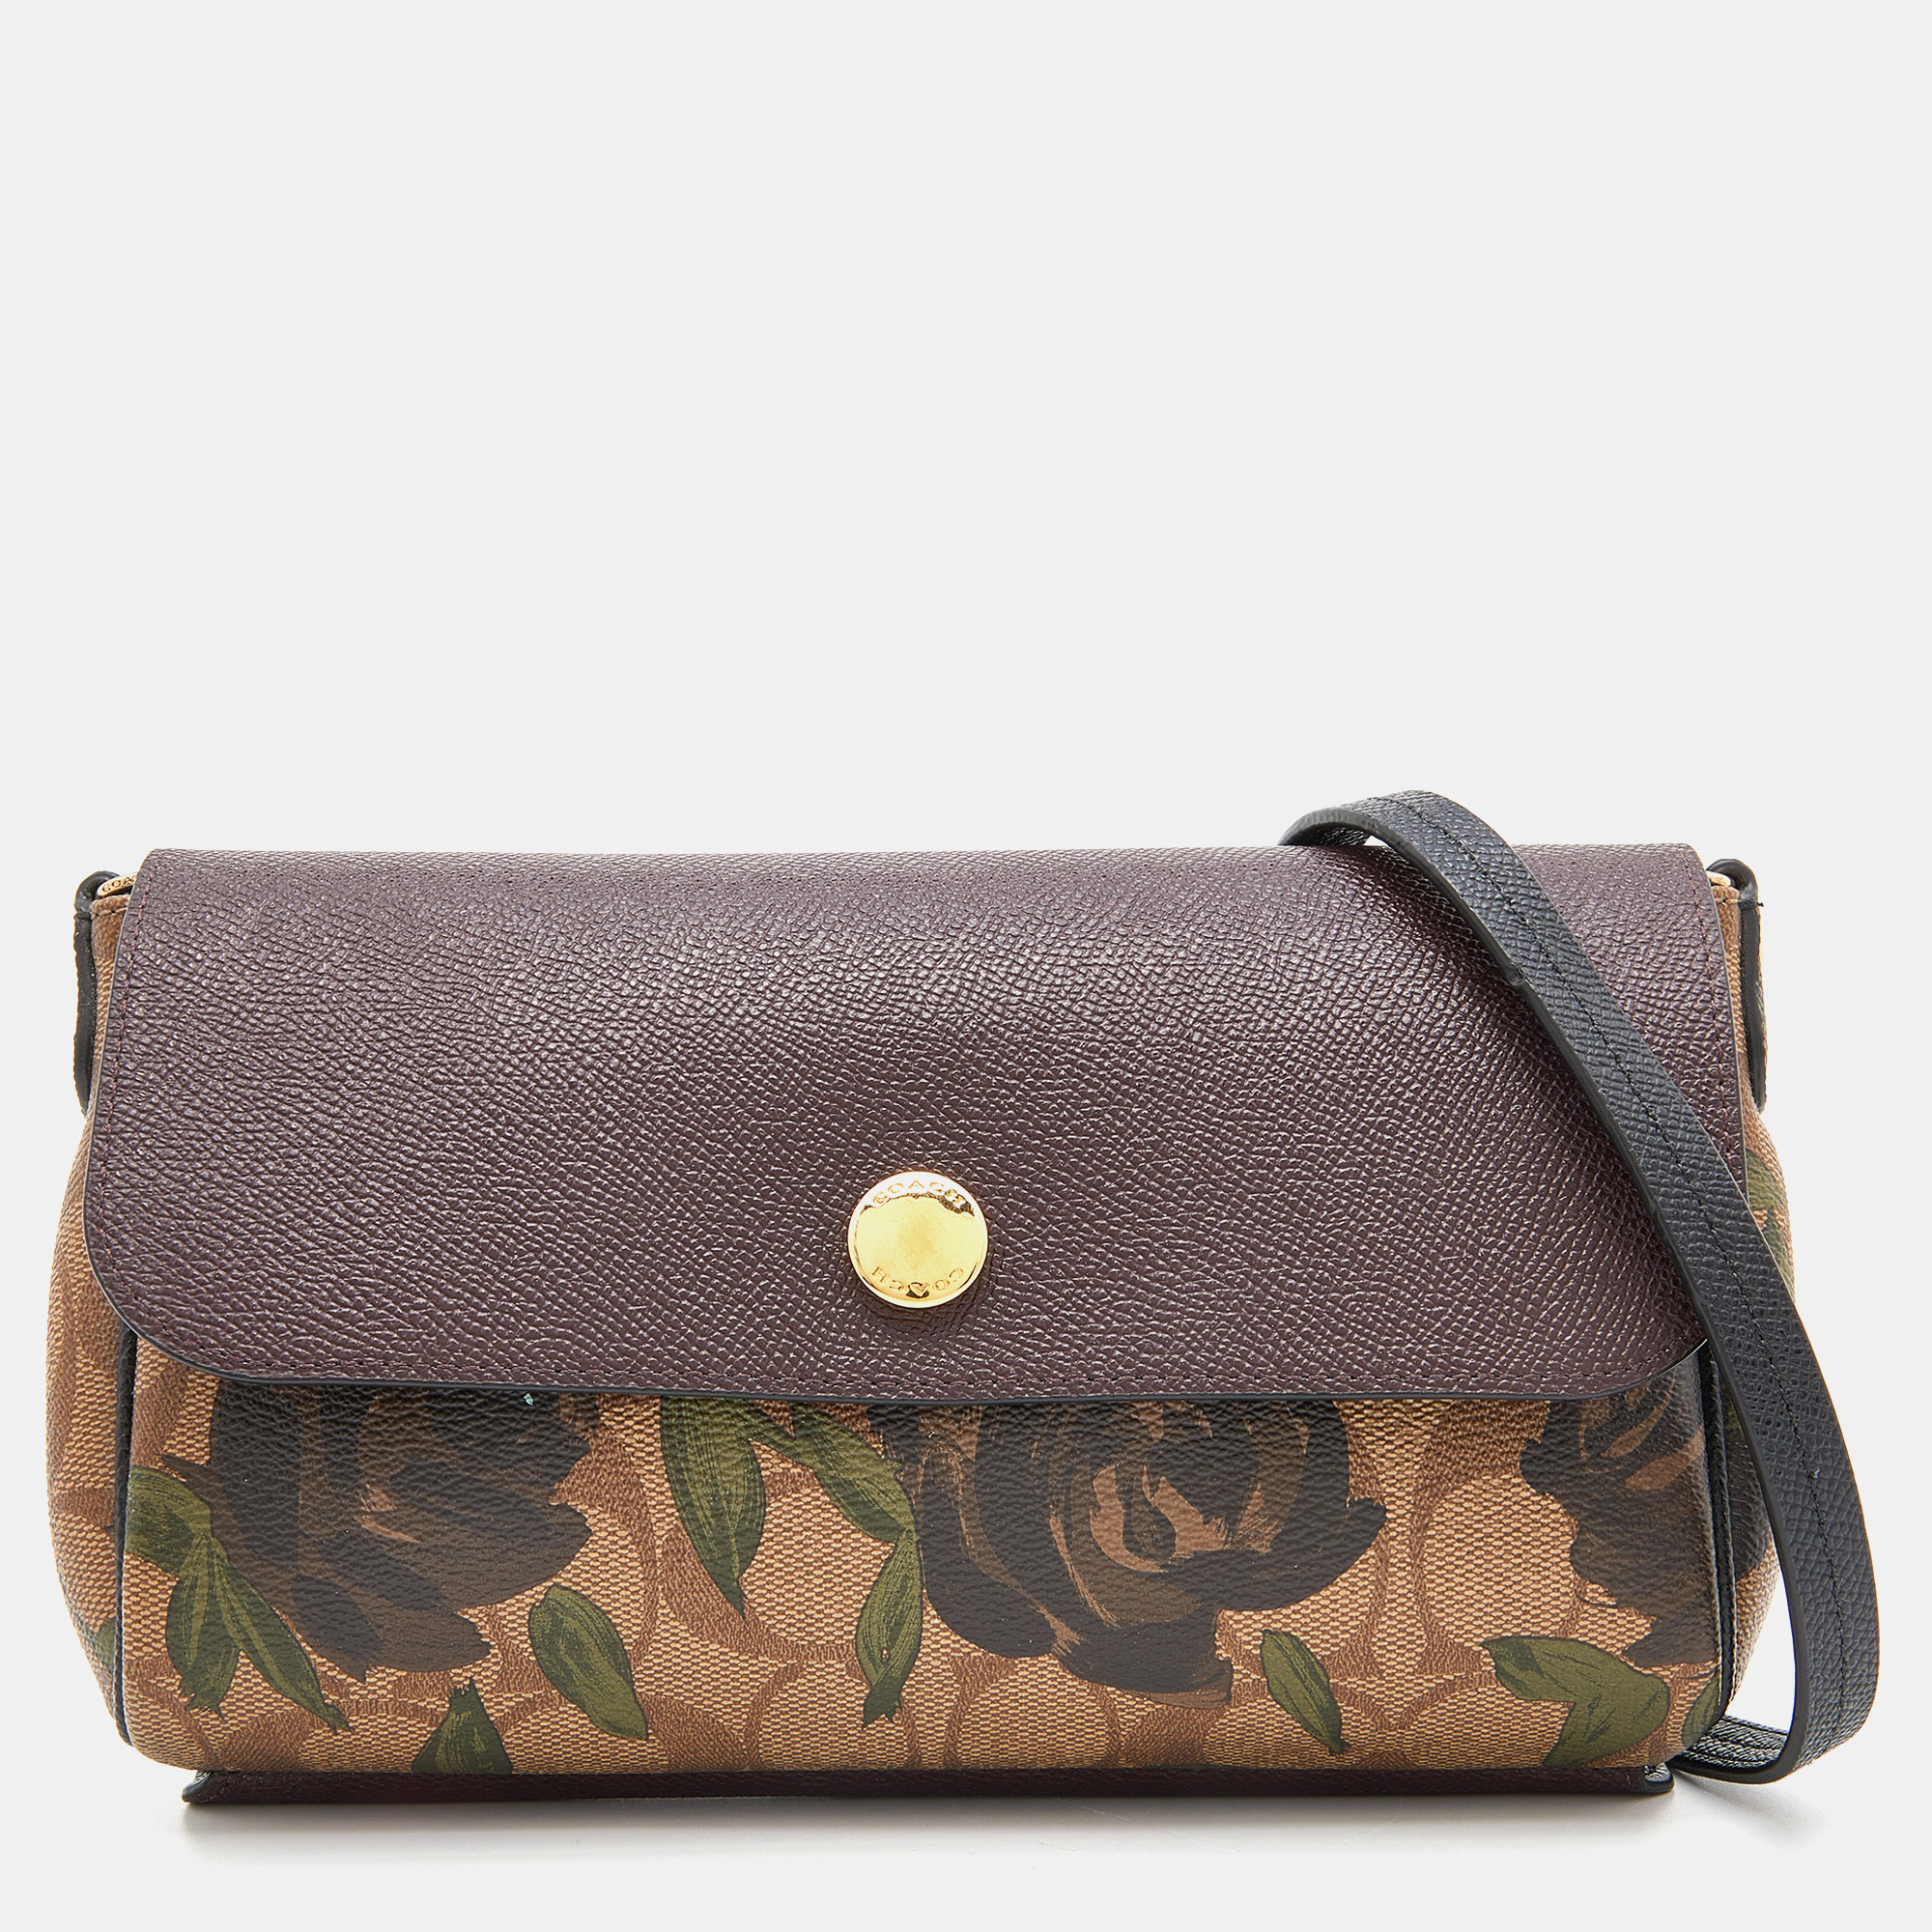 

Coach Black/Beige Signature Rose Print Coated Canvas and Leather Reversible Flap Crossbody Bag